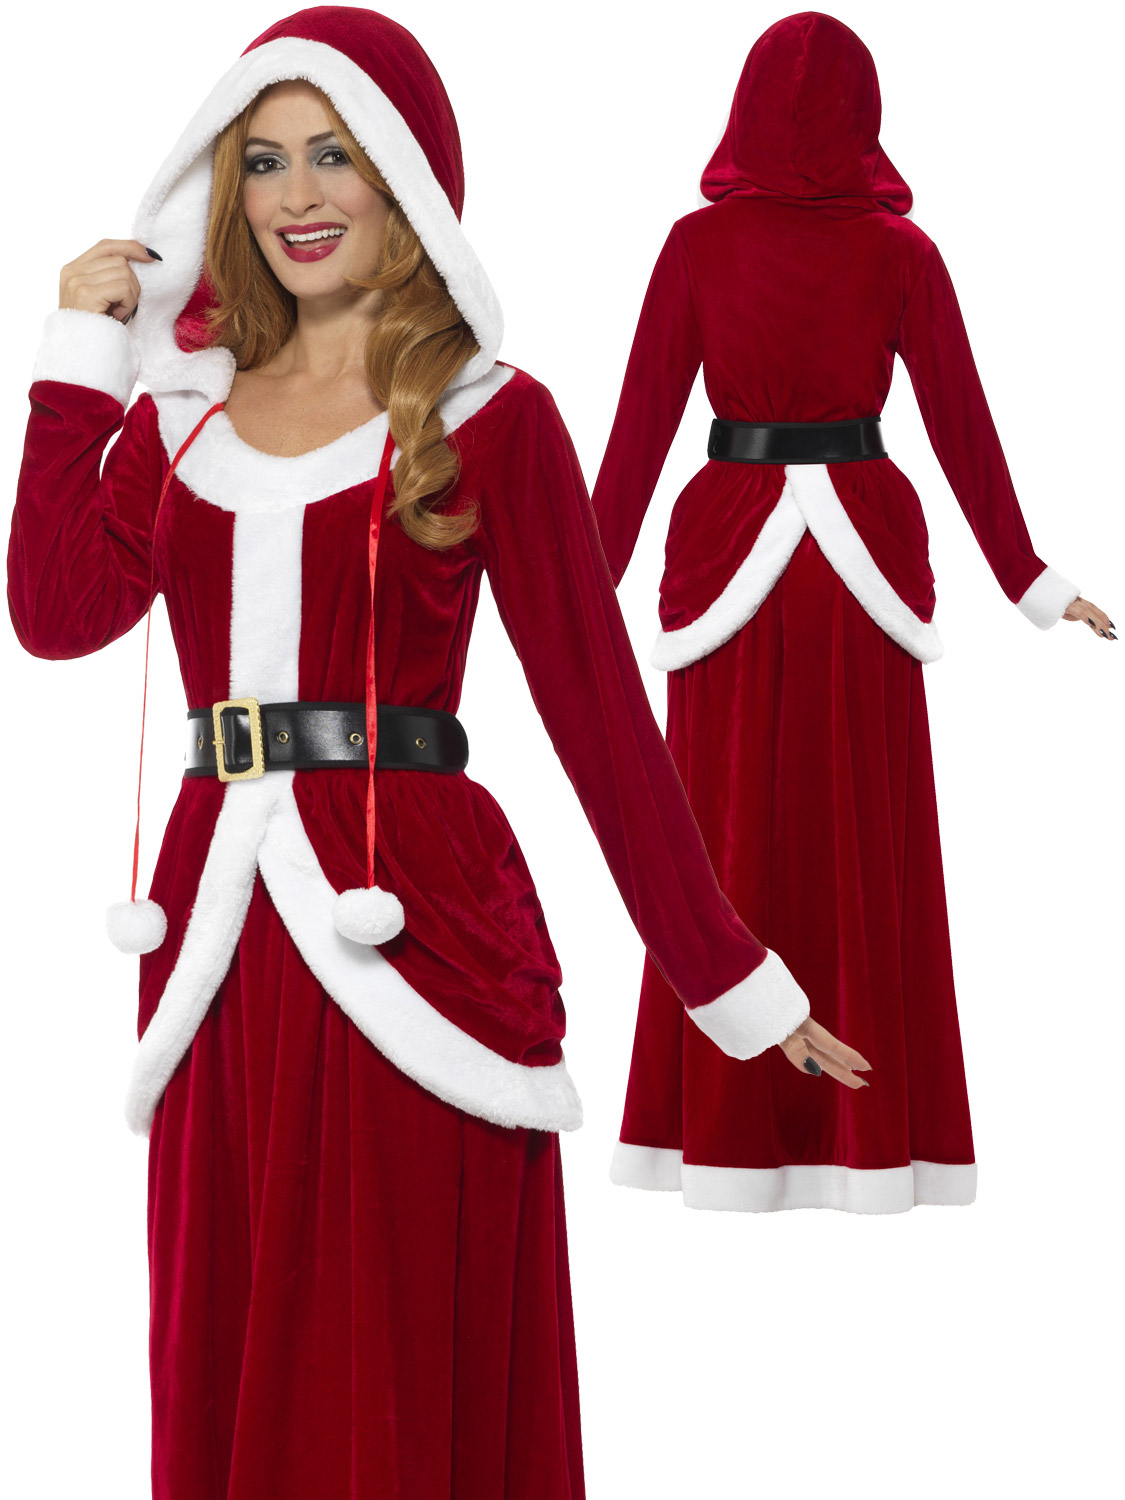 Ladies Deluxe Miss Claus Mrs Santa Long Fancy Dress Costume Christmas Outfit Ebay